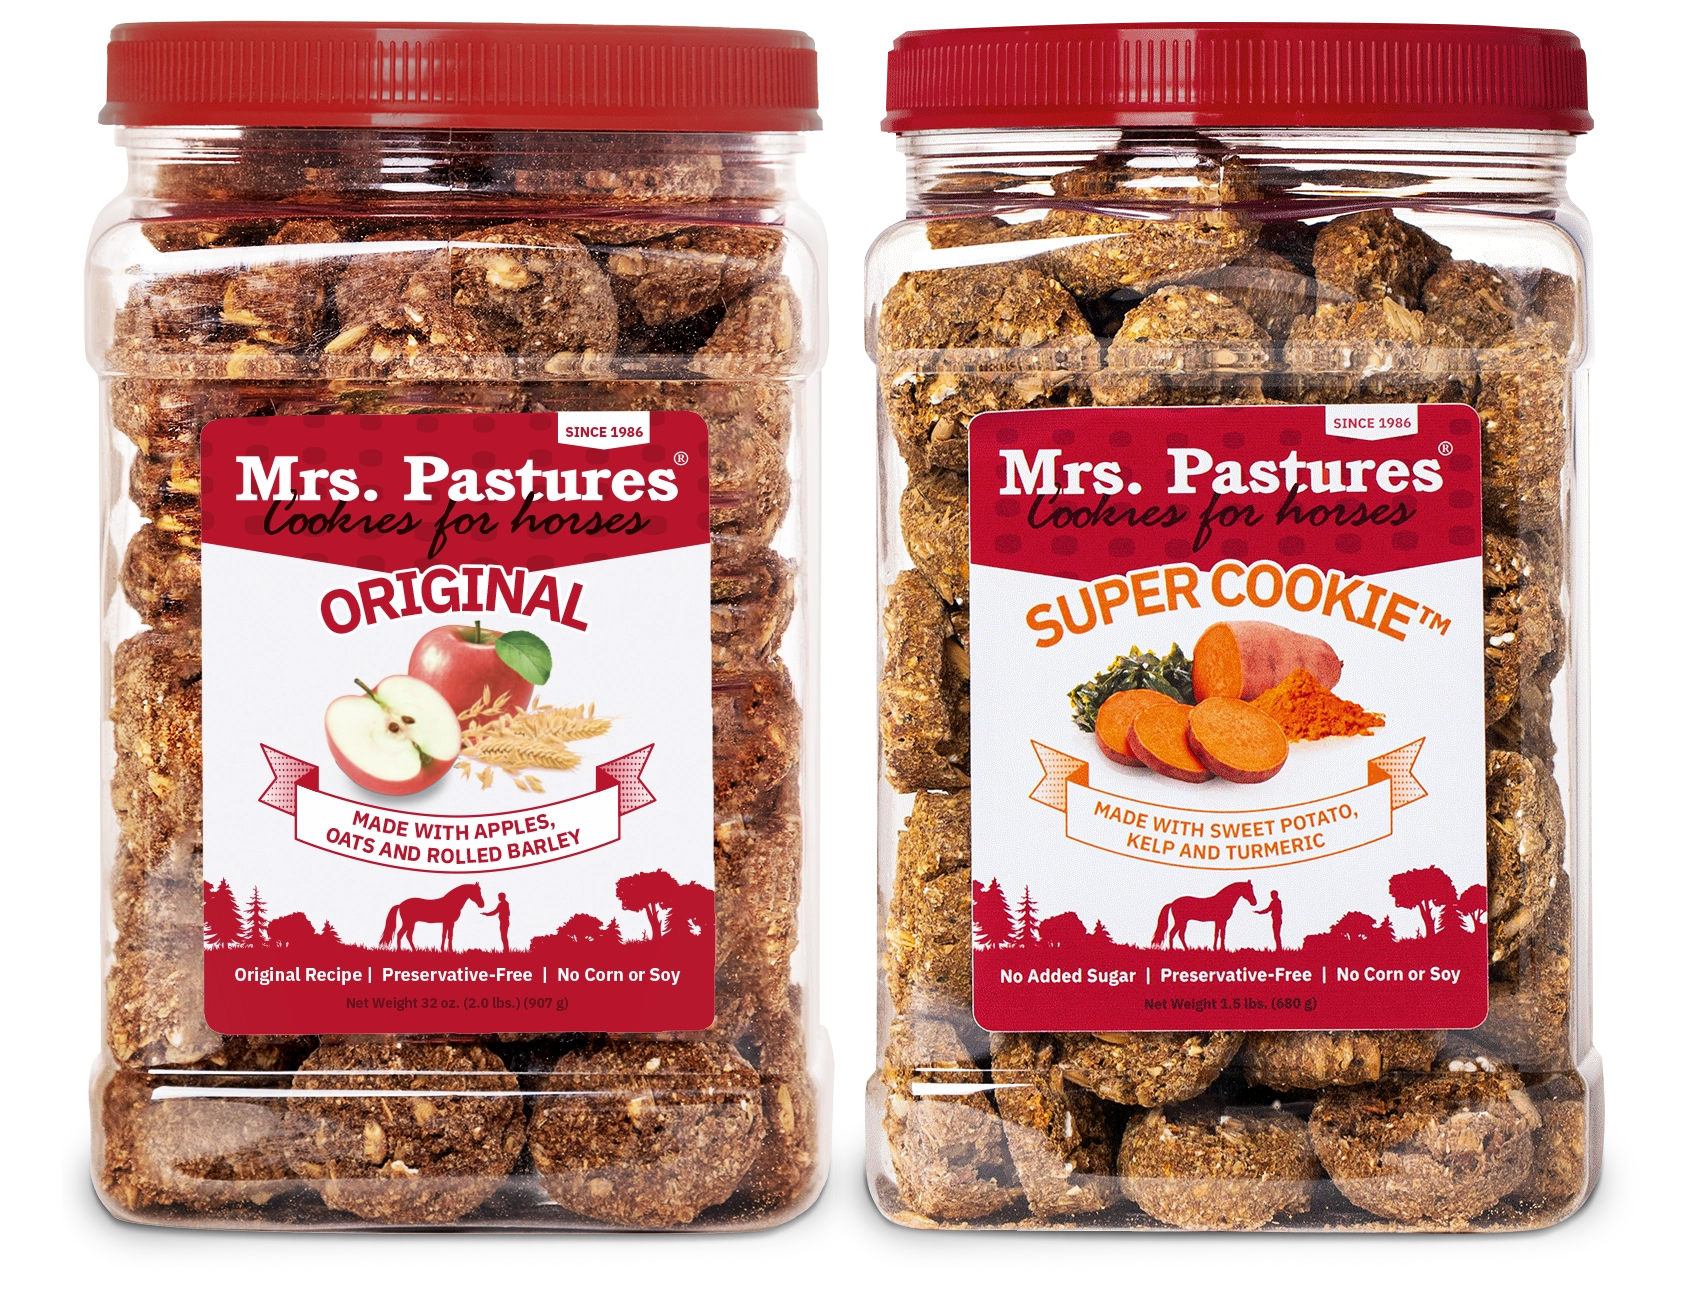 Two jars of Mrs. Pastures Cookies for Horses